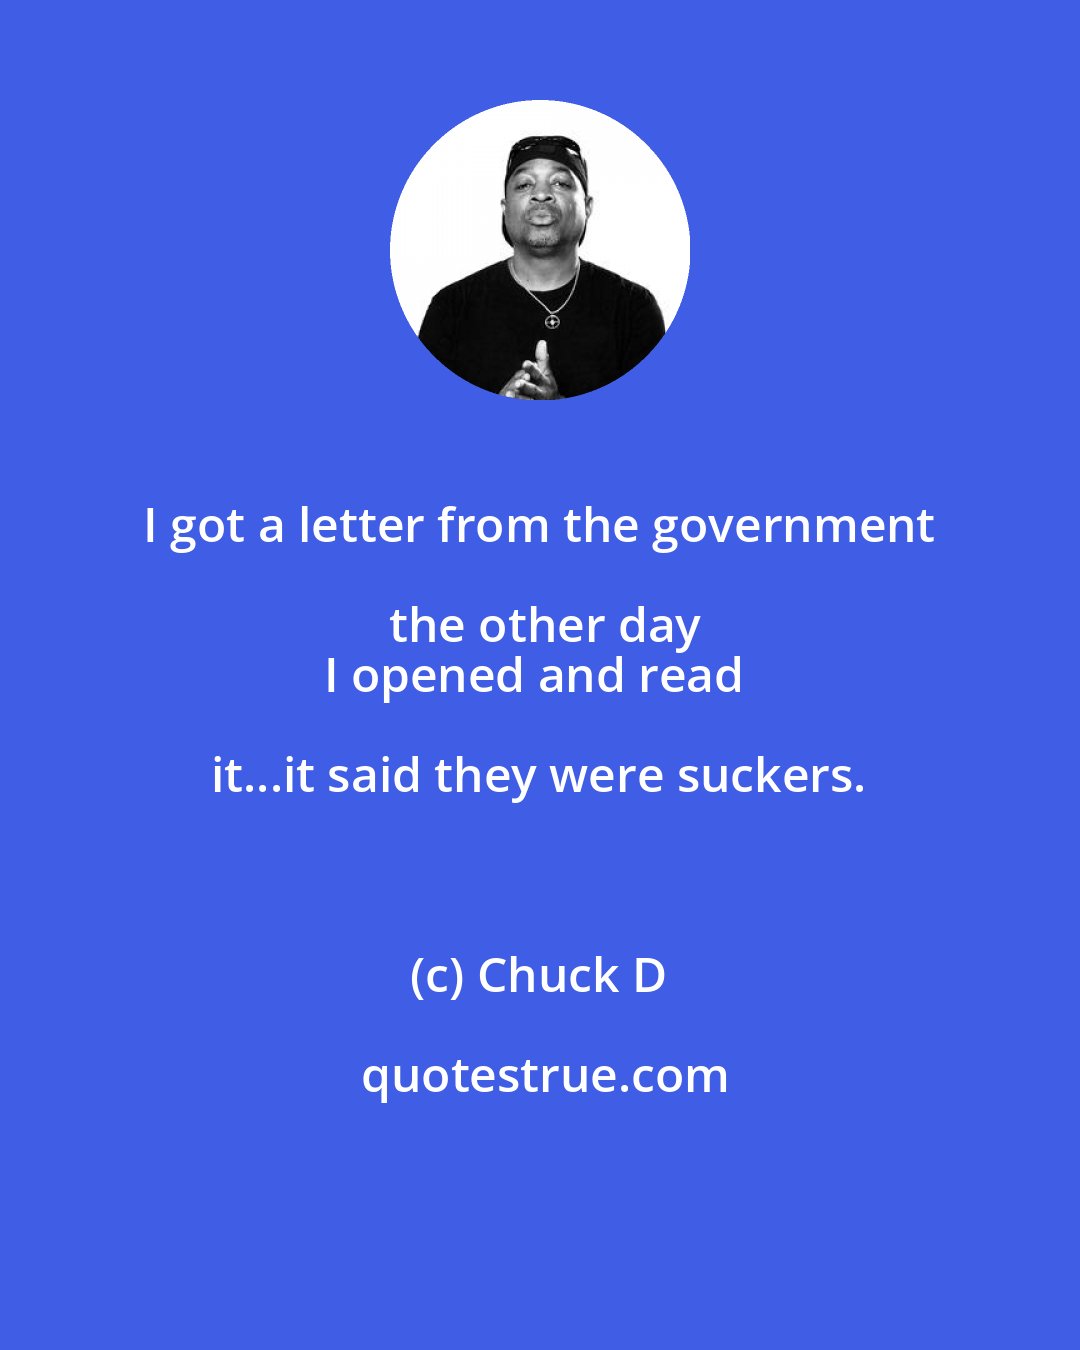 Chuck D: I got a letter from the government the other day
I opened and read it...it said they were suckers.